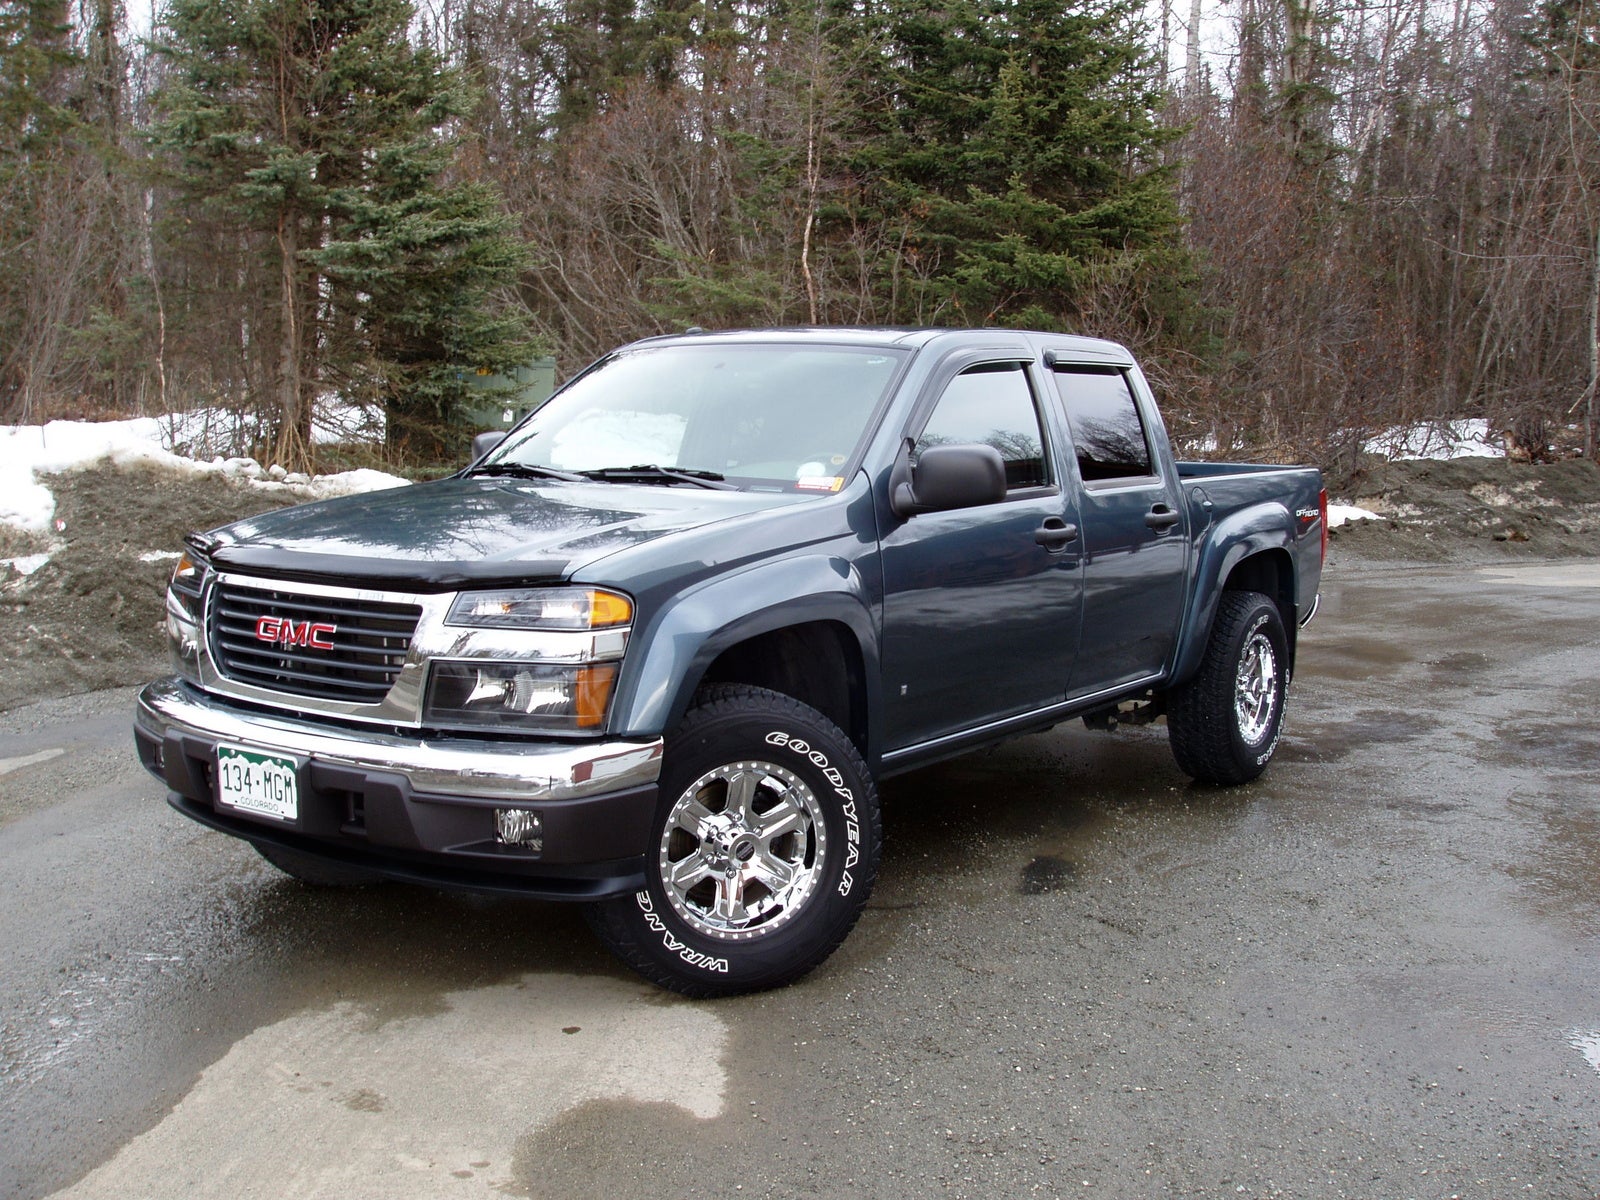 2006 Gmc canyon off road package crew cab #2